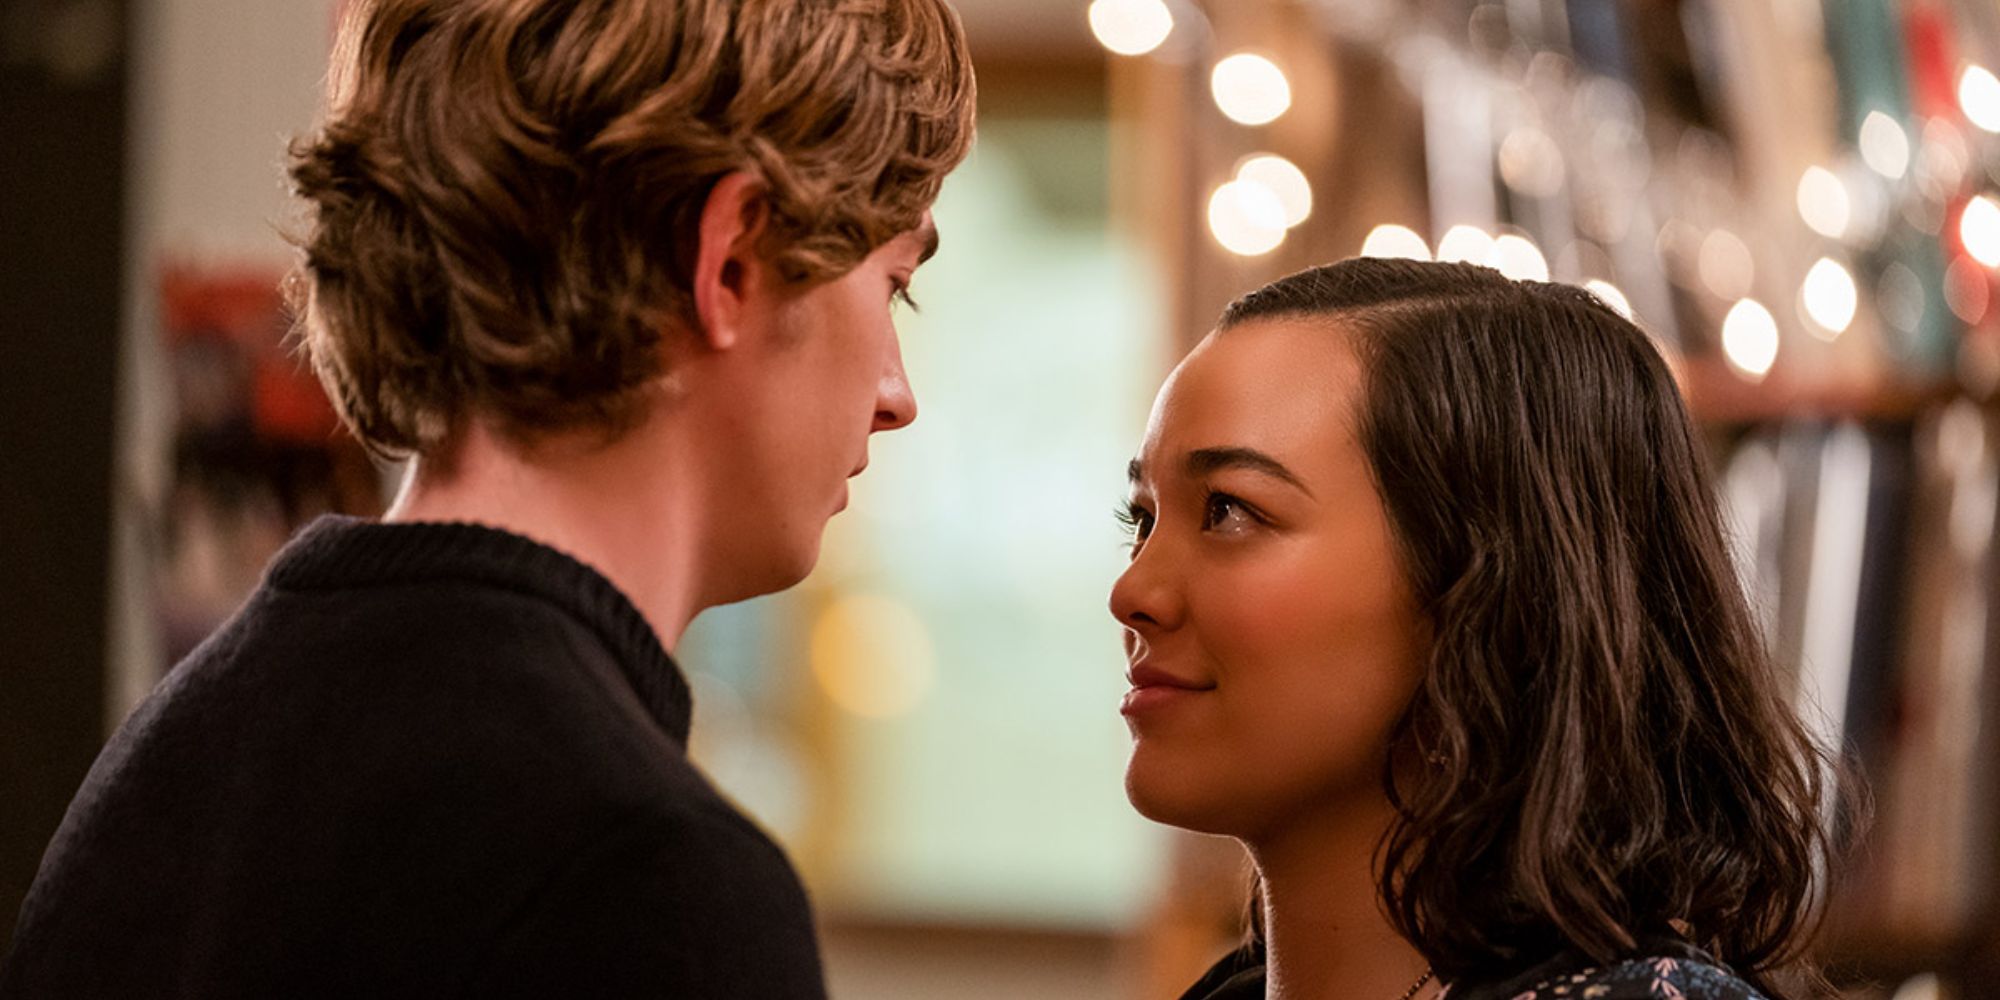 still of dash and lily sharing a moment, looking into each others eyes (Netflix 2020)